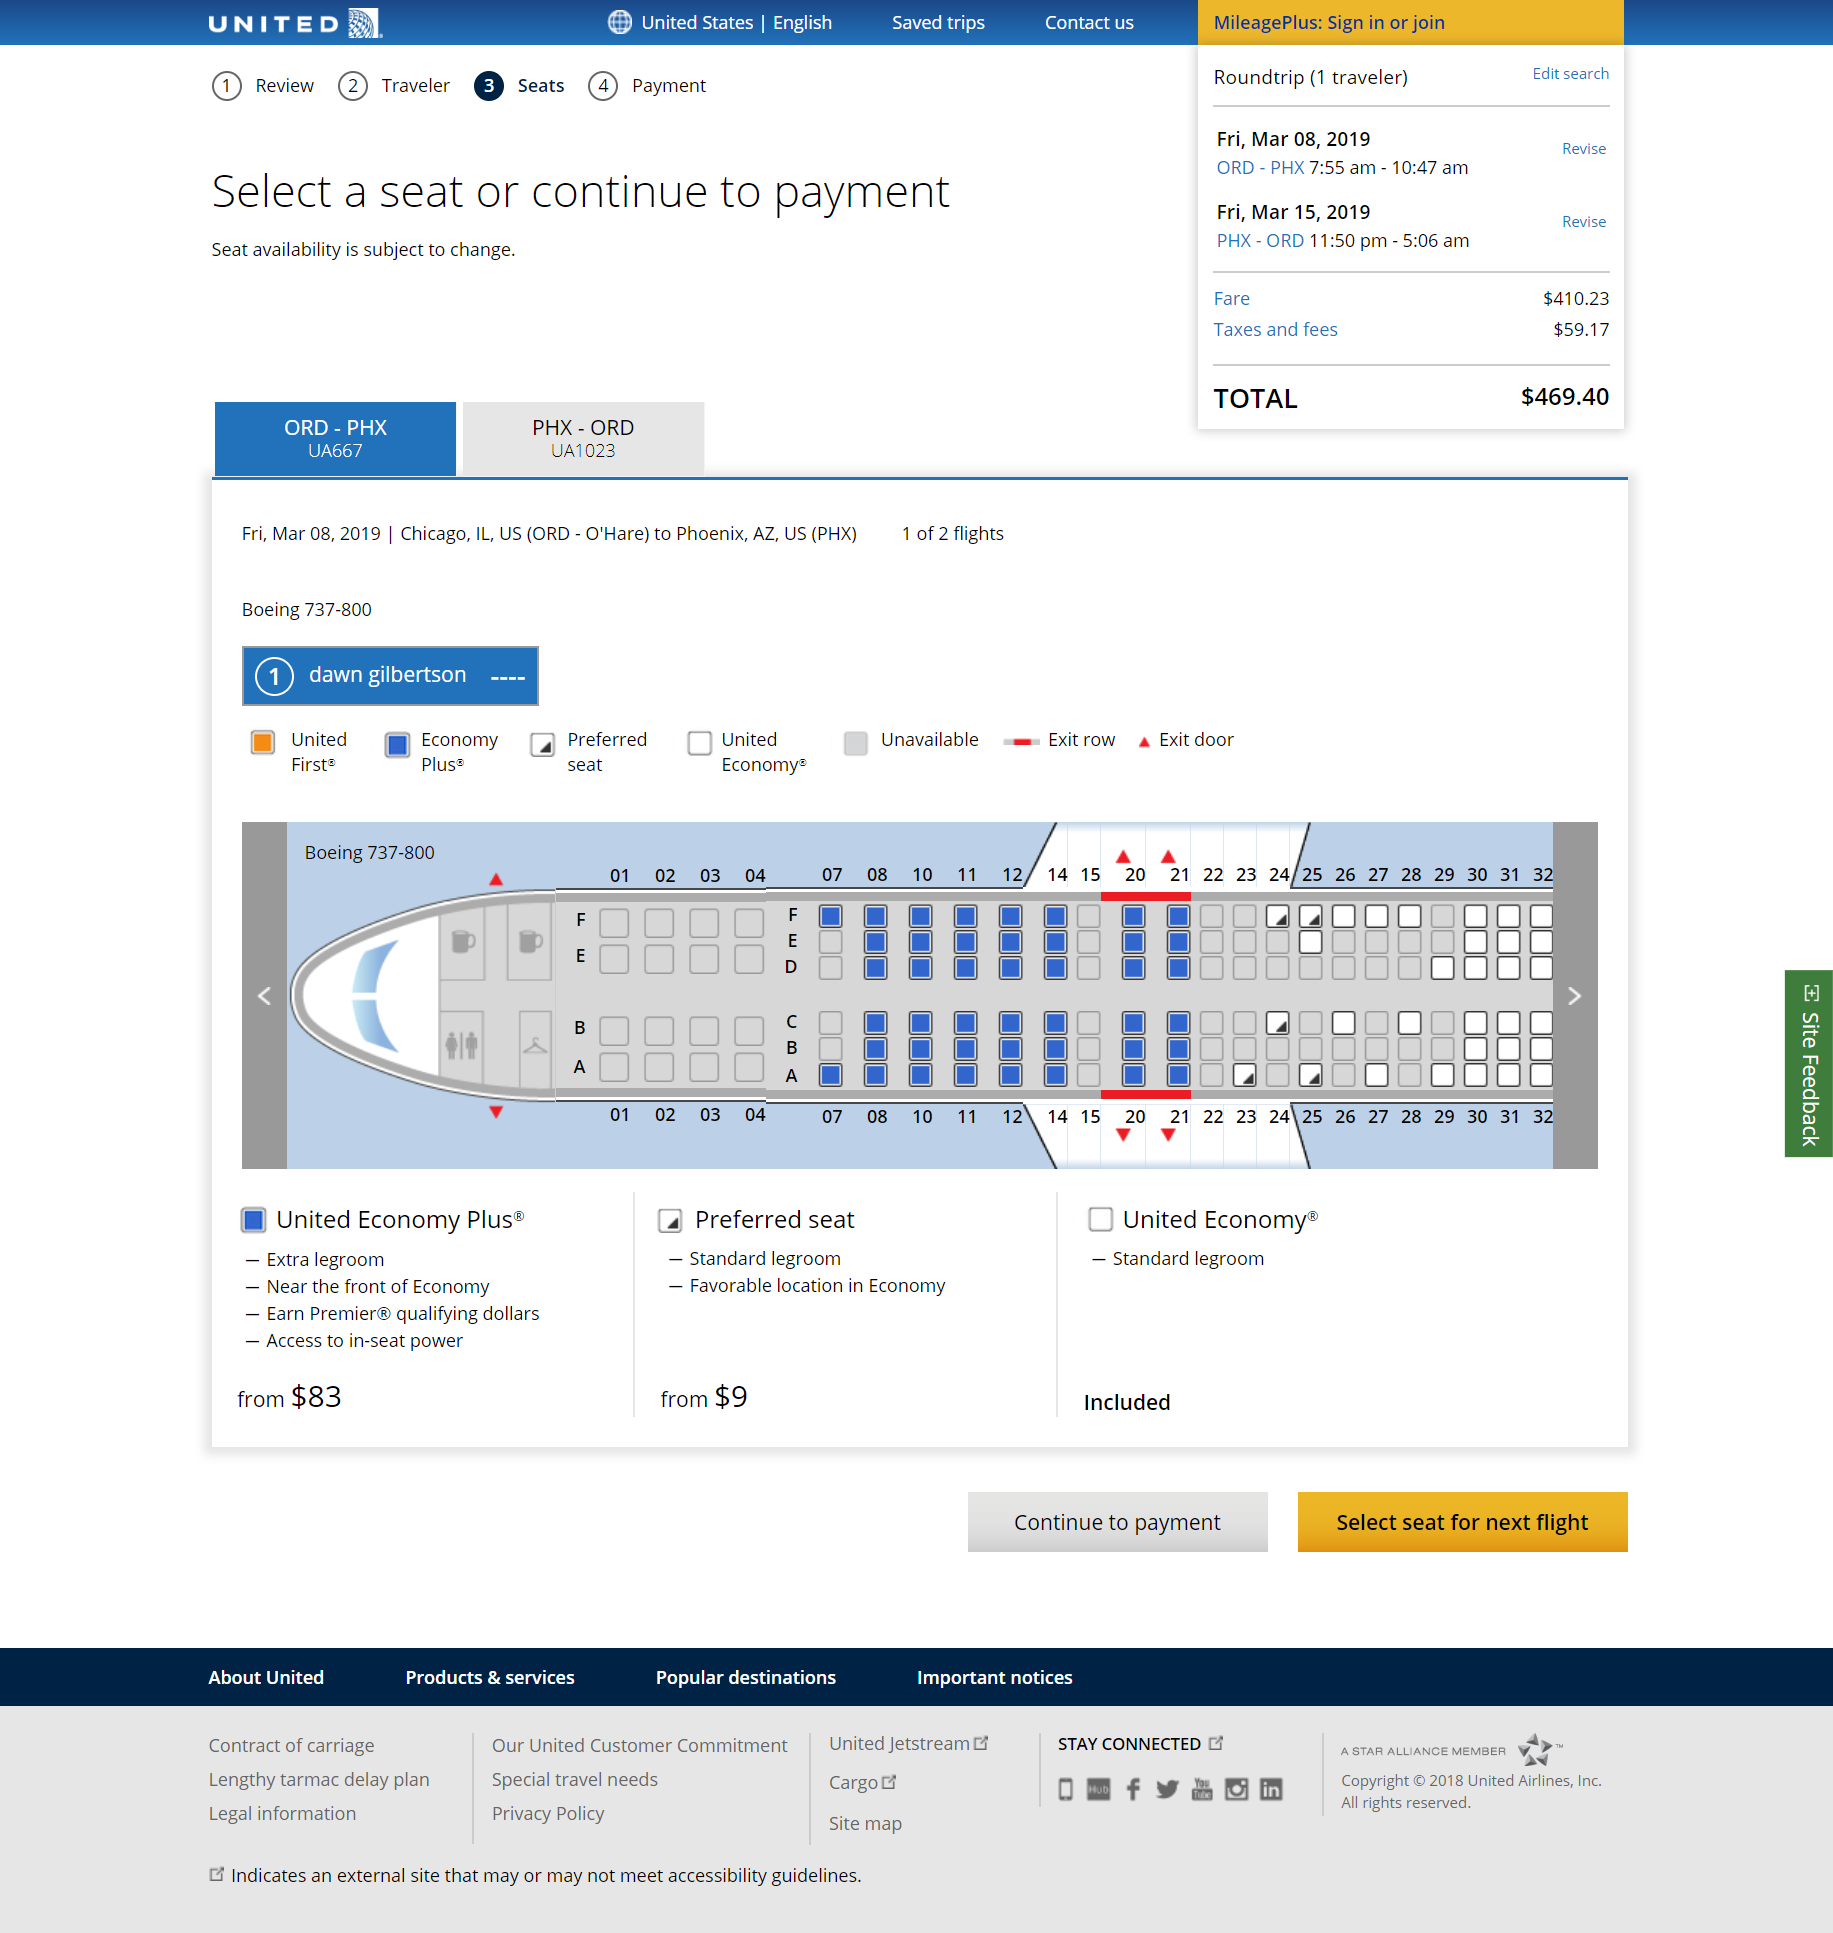 delta seat assignment fee